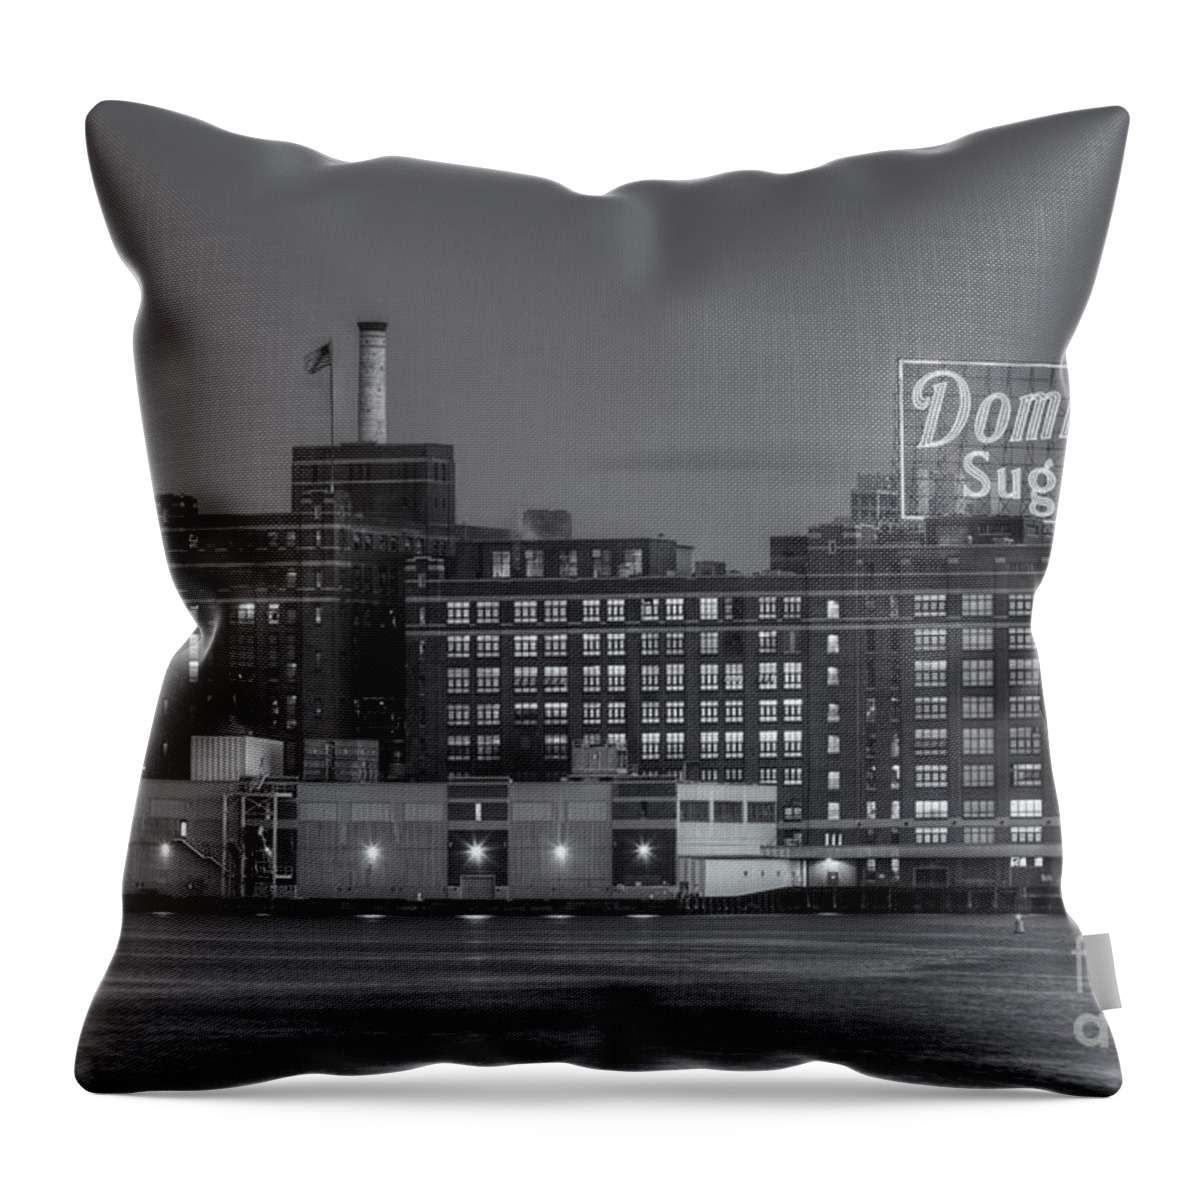 Clarence Holmes Throw Pillow featuring the photograph Baltimore Domino Sugars Plant II by Clarence Holmes